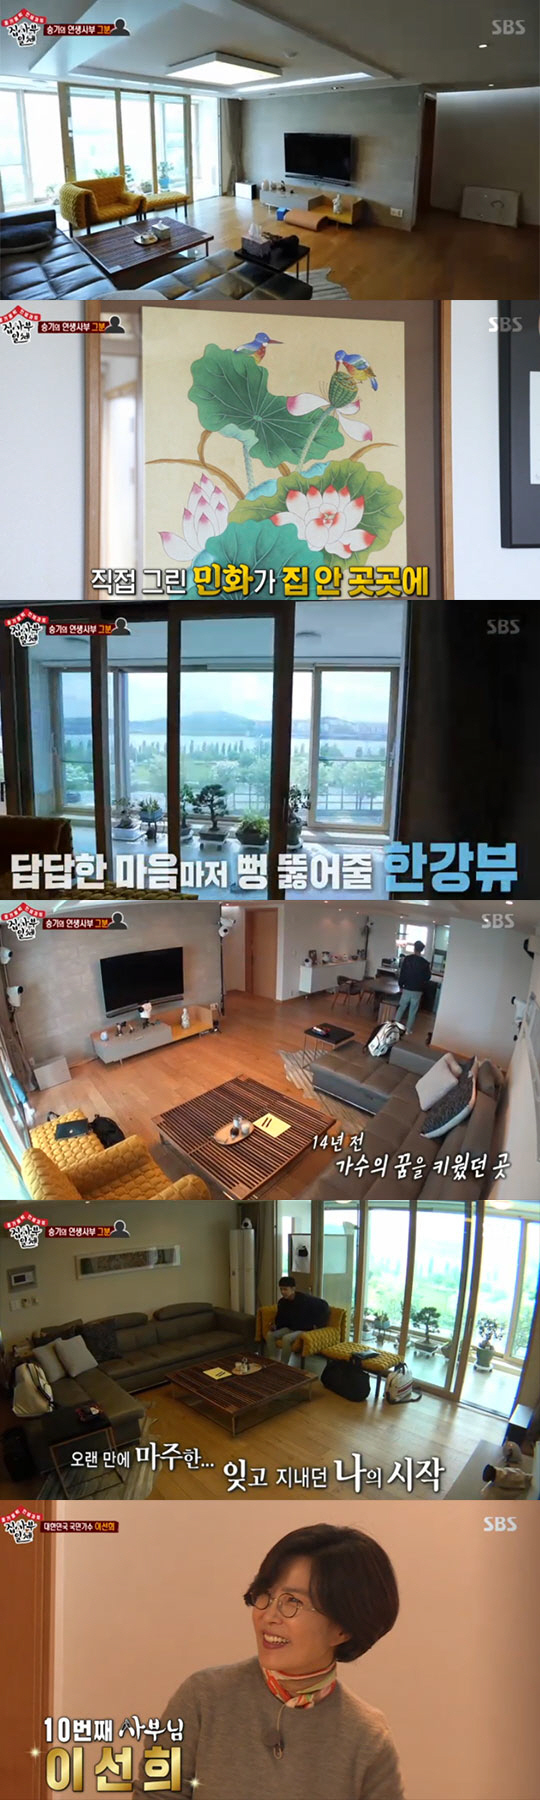 Singer Lee Sun-hee has revealed her home on the air for the first time.Lee Sun-hee showed up at the Master of Singer Lee Seung-gi on SBS All The Butlers which was broadcast on the afternoon of the 27th.Lee Seung-gi and Lee Sang-yoon, Yang Se-hyeong, and Yook Seong-jae went to Lee Sun-hees house.Lee Seung-gi recalled his days as a singer trainee 14 years ago, staying and eating at Lee Sun-hees home.Ive been here for a long time and I practiced before my debut, he said. I practiced singing at night while watching the Han River.Lee Sun-hee, who released the house for the first time on the day, said, It is the first time a camera is coming home.I still believe only you, he said, relying on Lee Seung-gi.Lee Sun-hees living room, which was unveiled, was covered with a private painting. The dress room attracted attention with various jeans and scarves for neck protection.